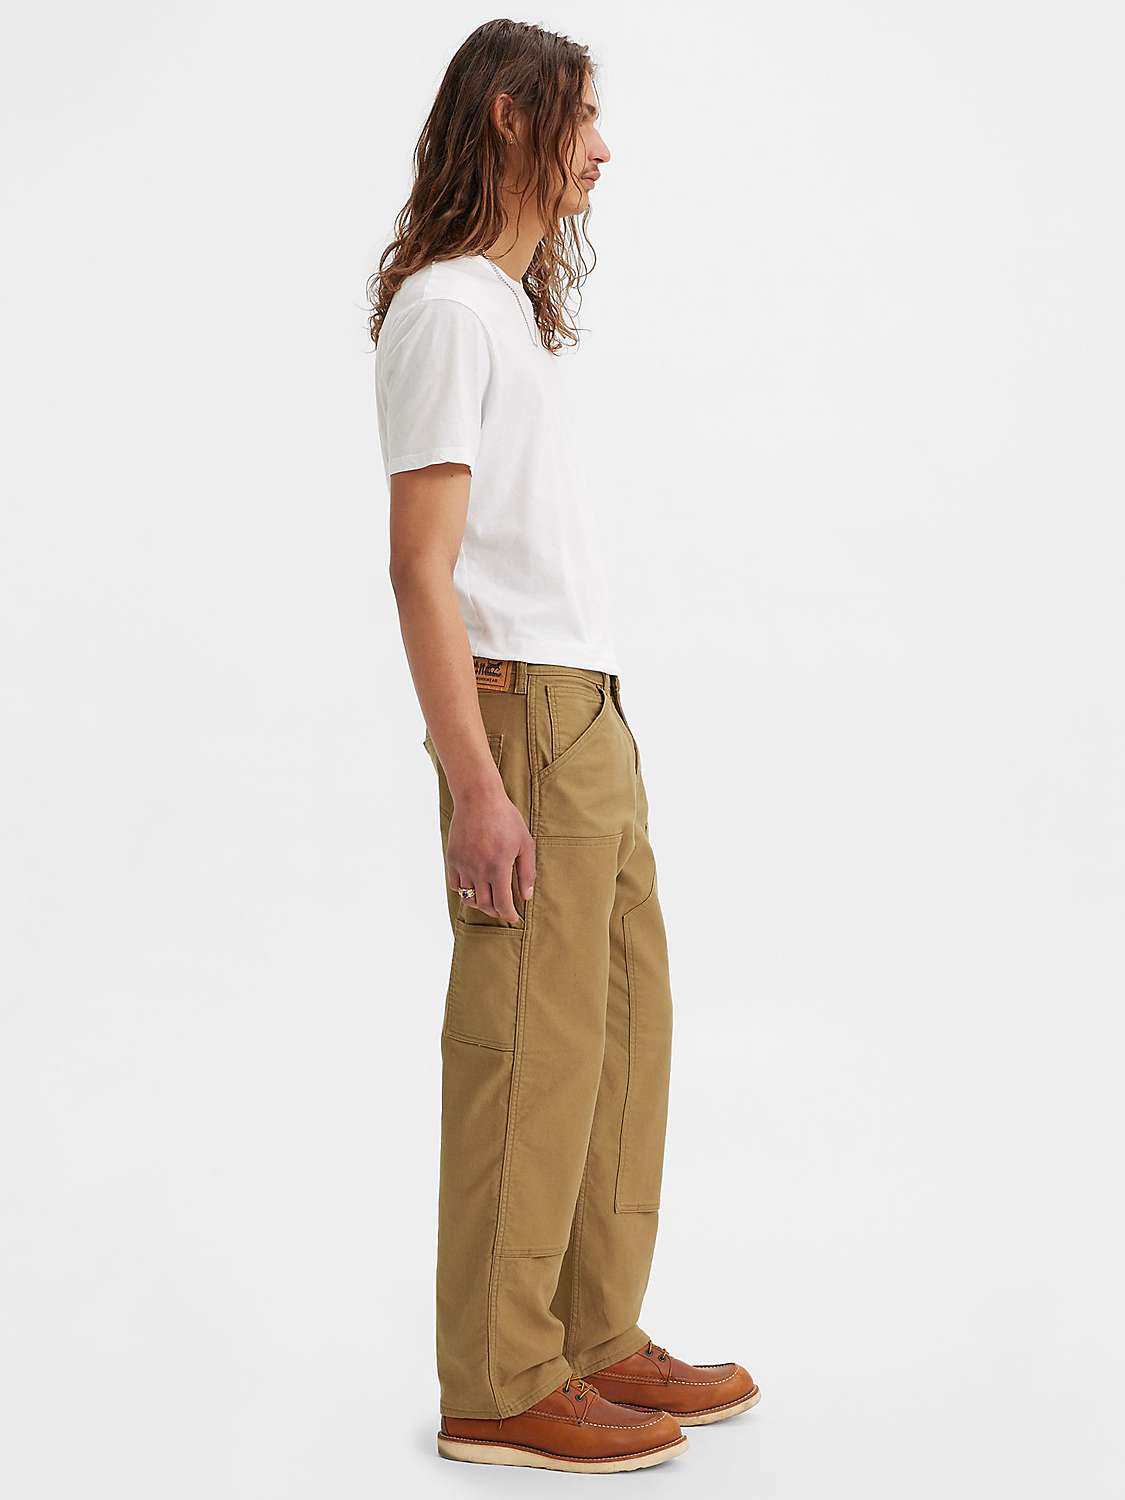 Buy Levi's Workwear 565 Jeans Online at johnlewis.com